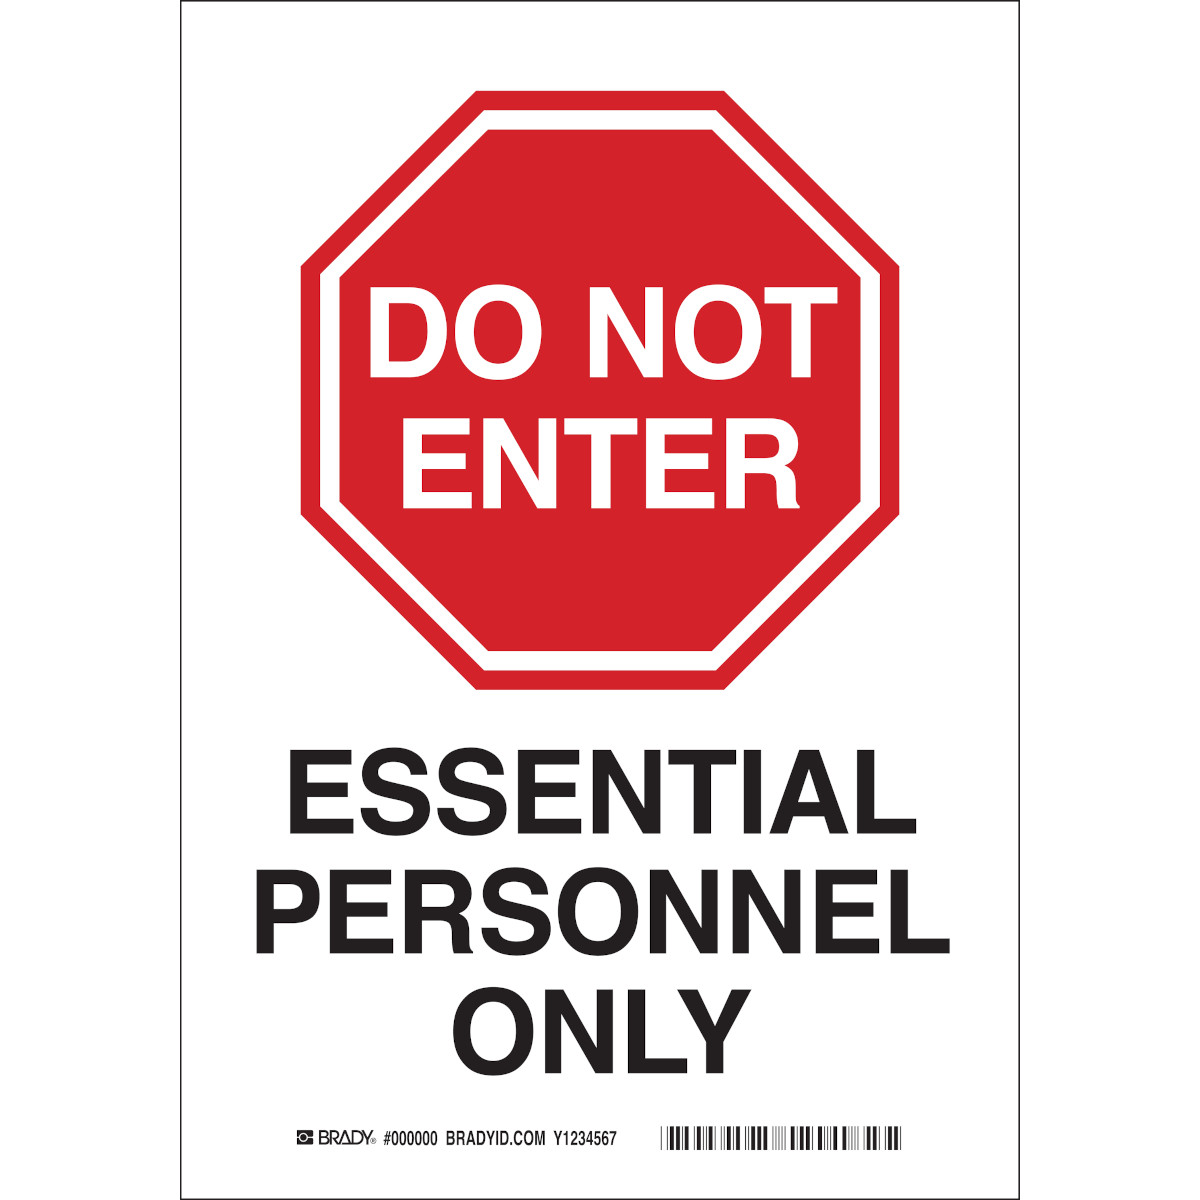 Brady Covid 19 Signs Do Not Enter Essential Personnel Only Bradyid Com